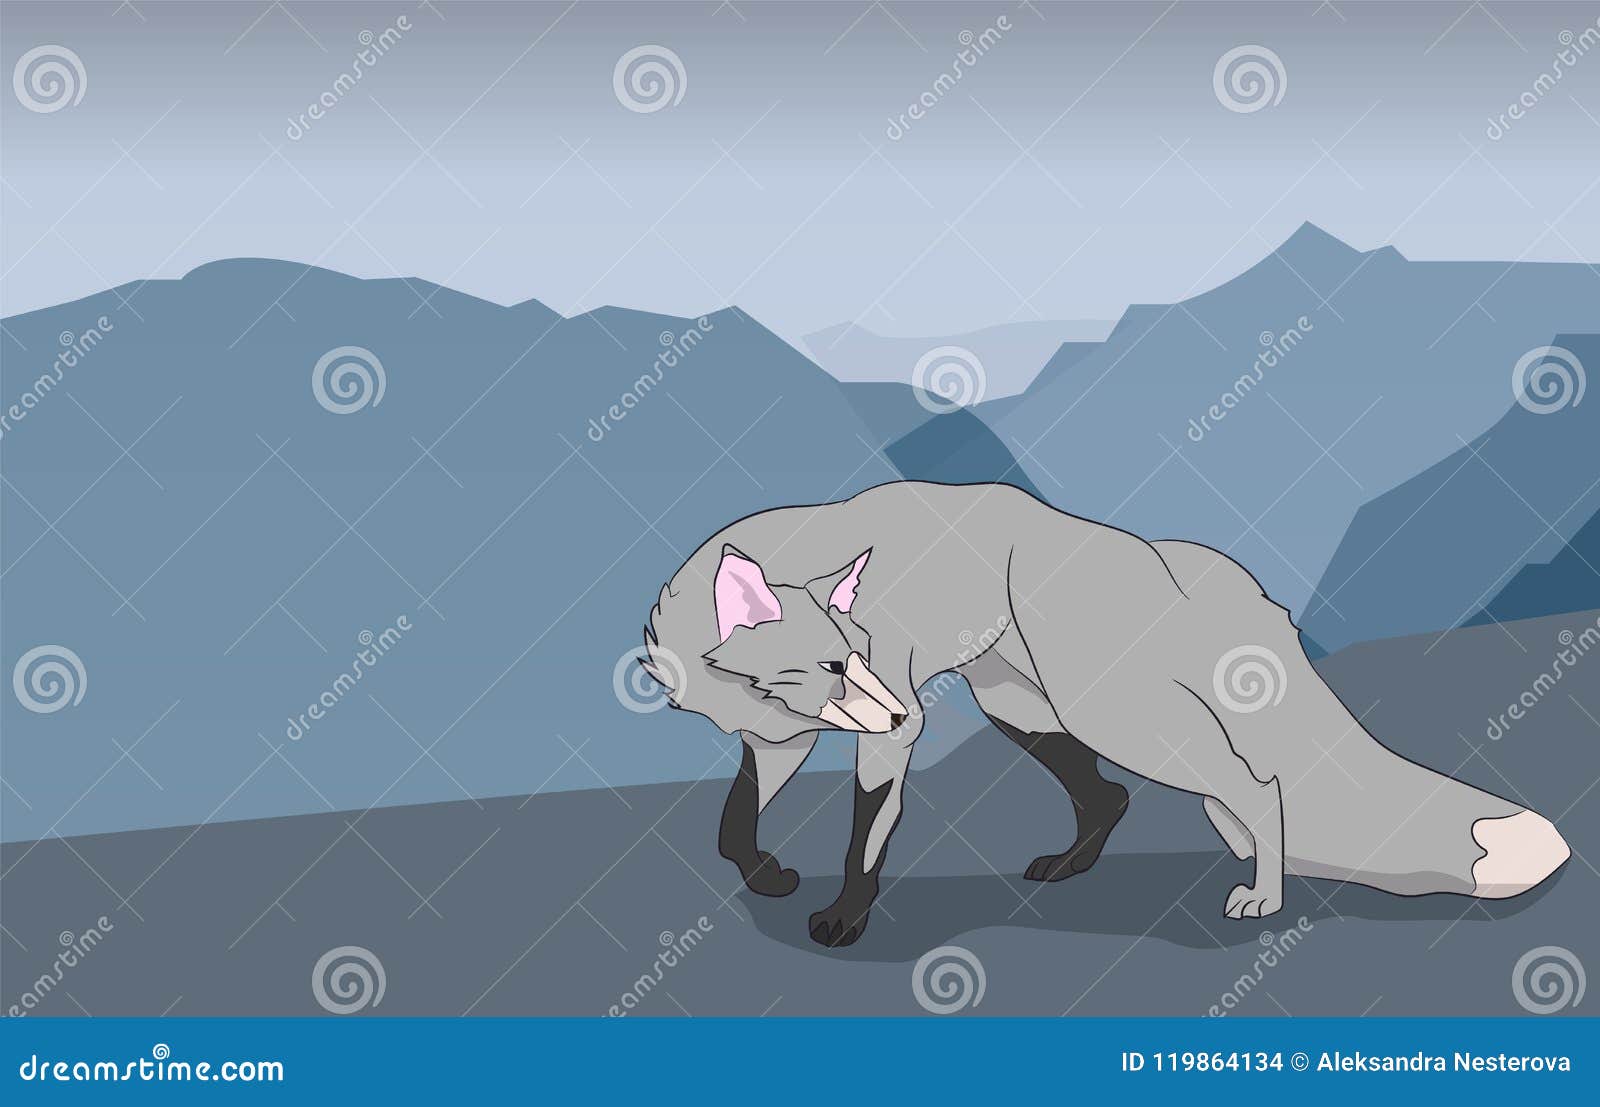 Fox on a Background of Mountains, Stock Vector - Illustration of design ...